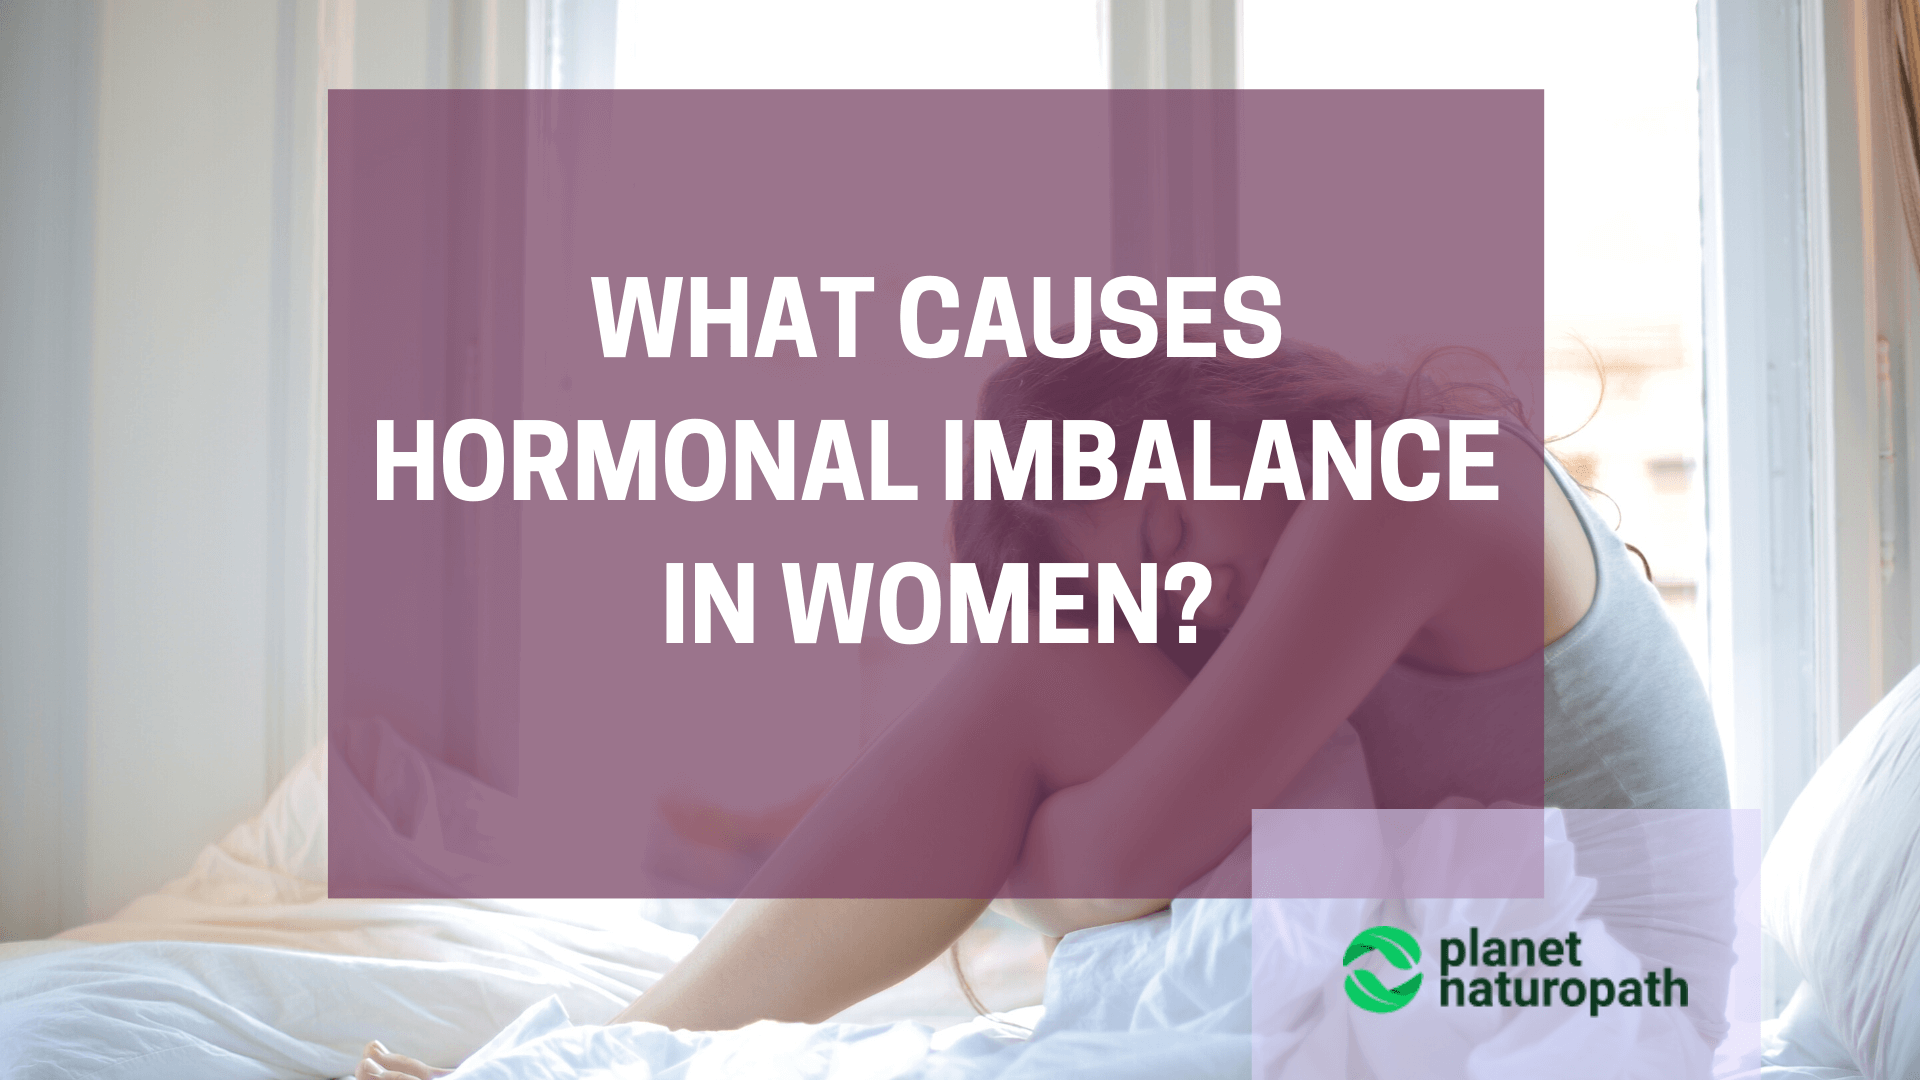 Hormonal Imbalance: Signs, Symptoms And Treatments For Women